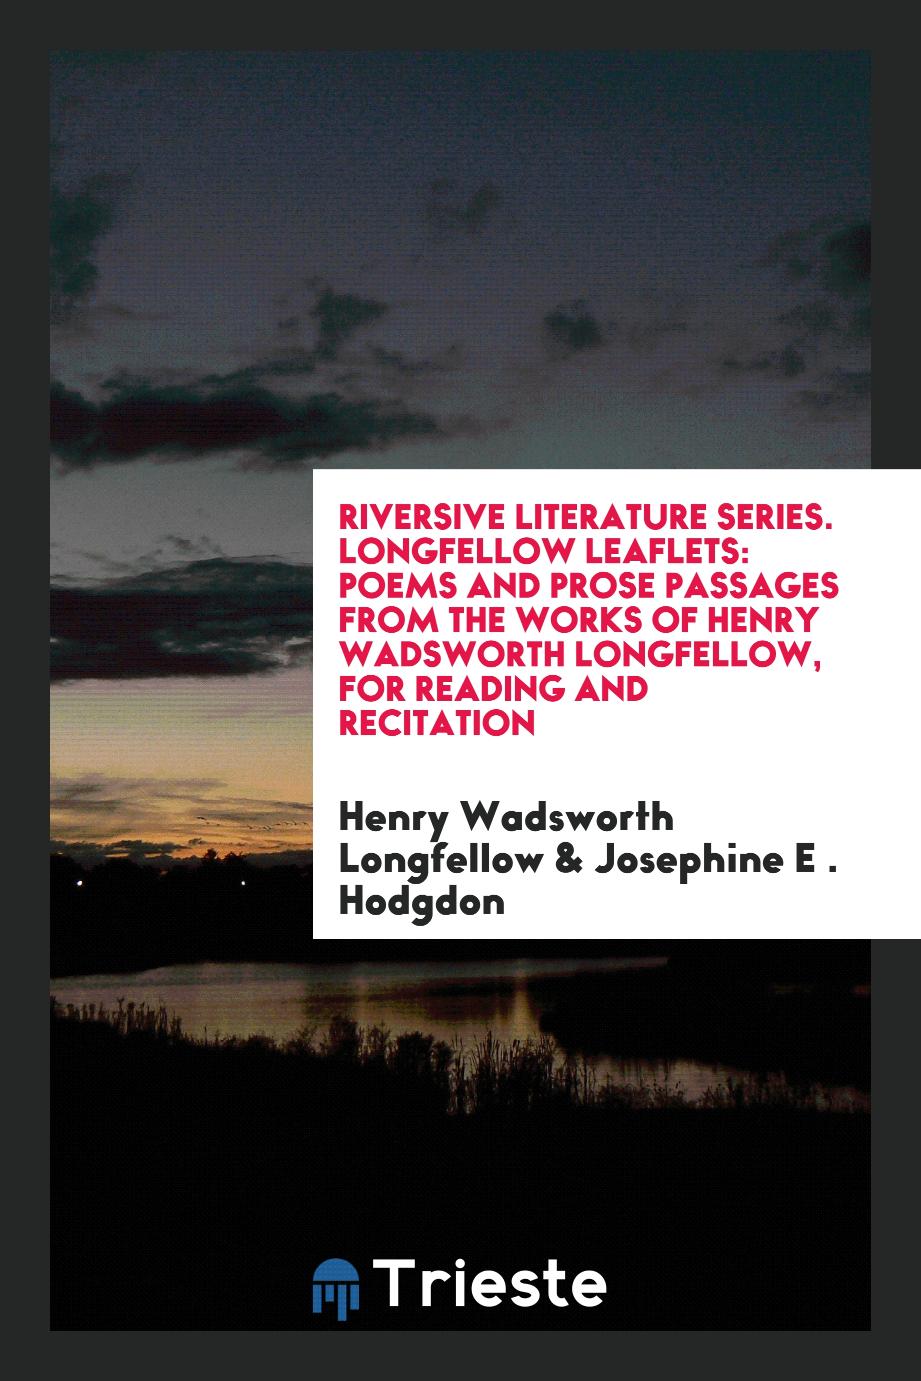 Riversive Literature Series. Longfellow Leaflets: Poems and Prose Passages from the Works of Henry Wadsworth Longfellow, for Reading and Recitation